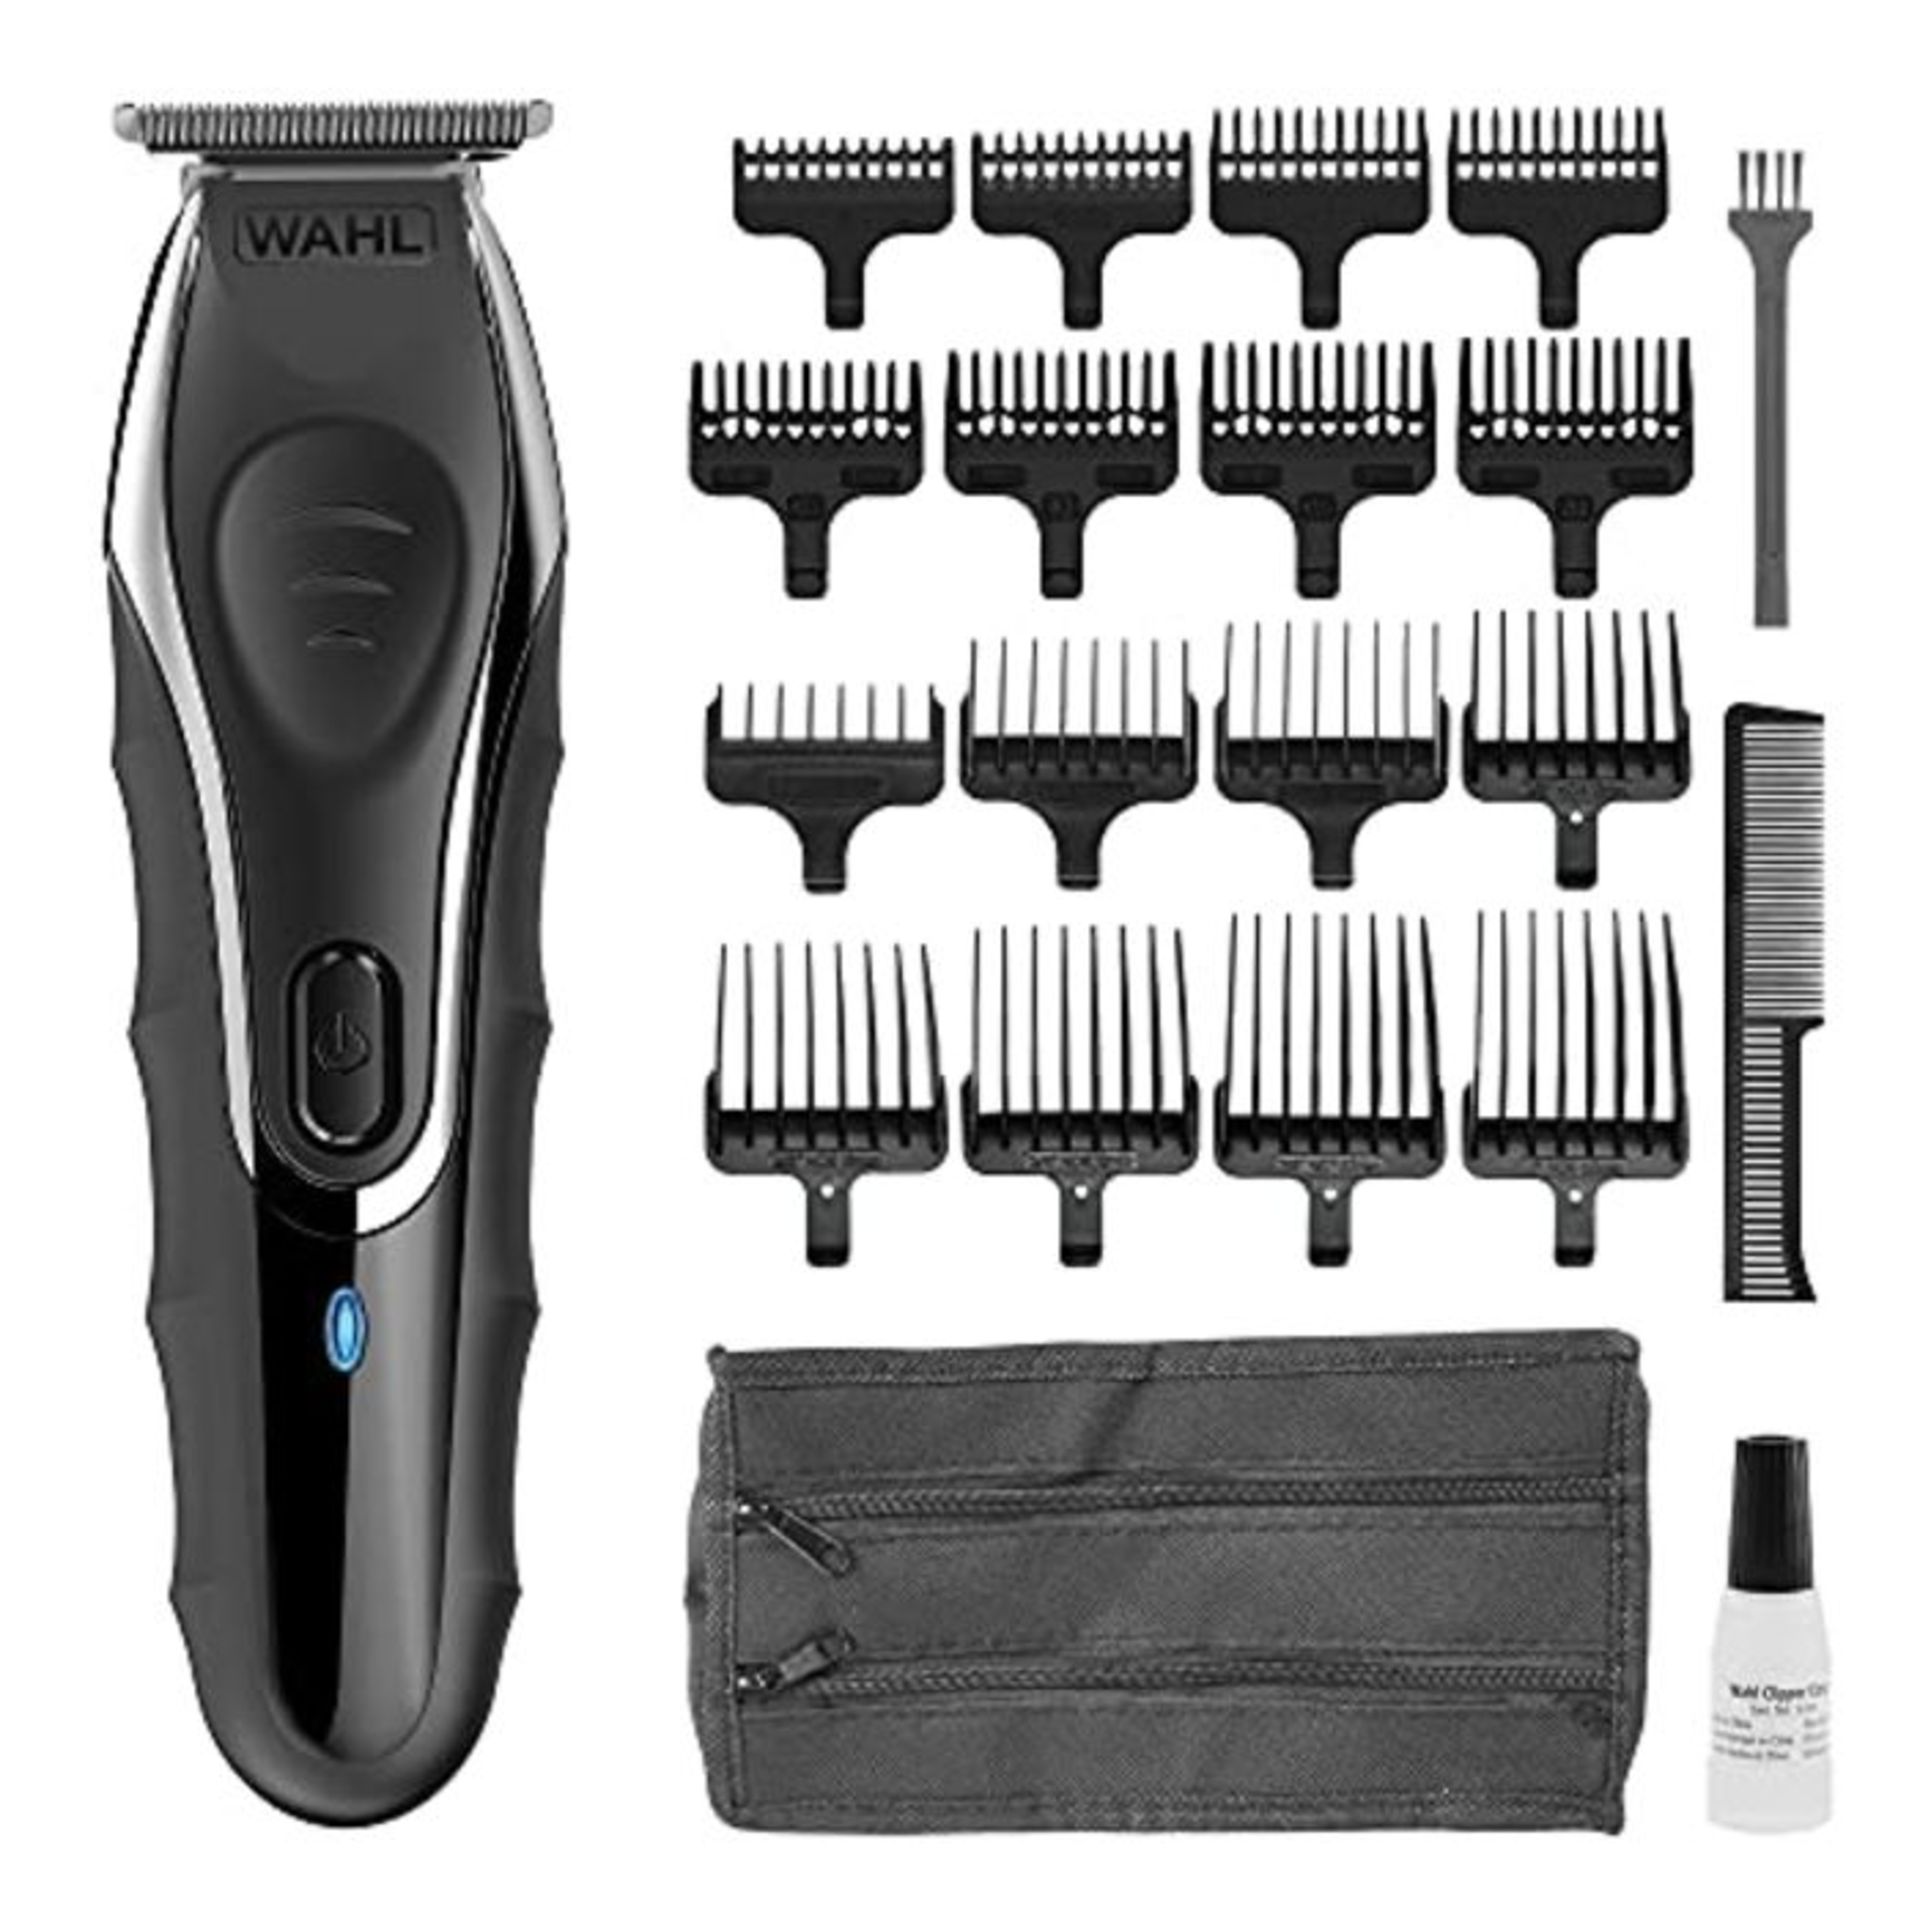 RRP £77.00 WAHL Beard Trimmer Men, Aqua Blade Hair Trimmers for Men, Stubble Trimmer, Male Groomi